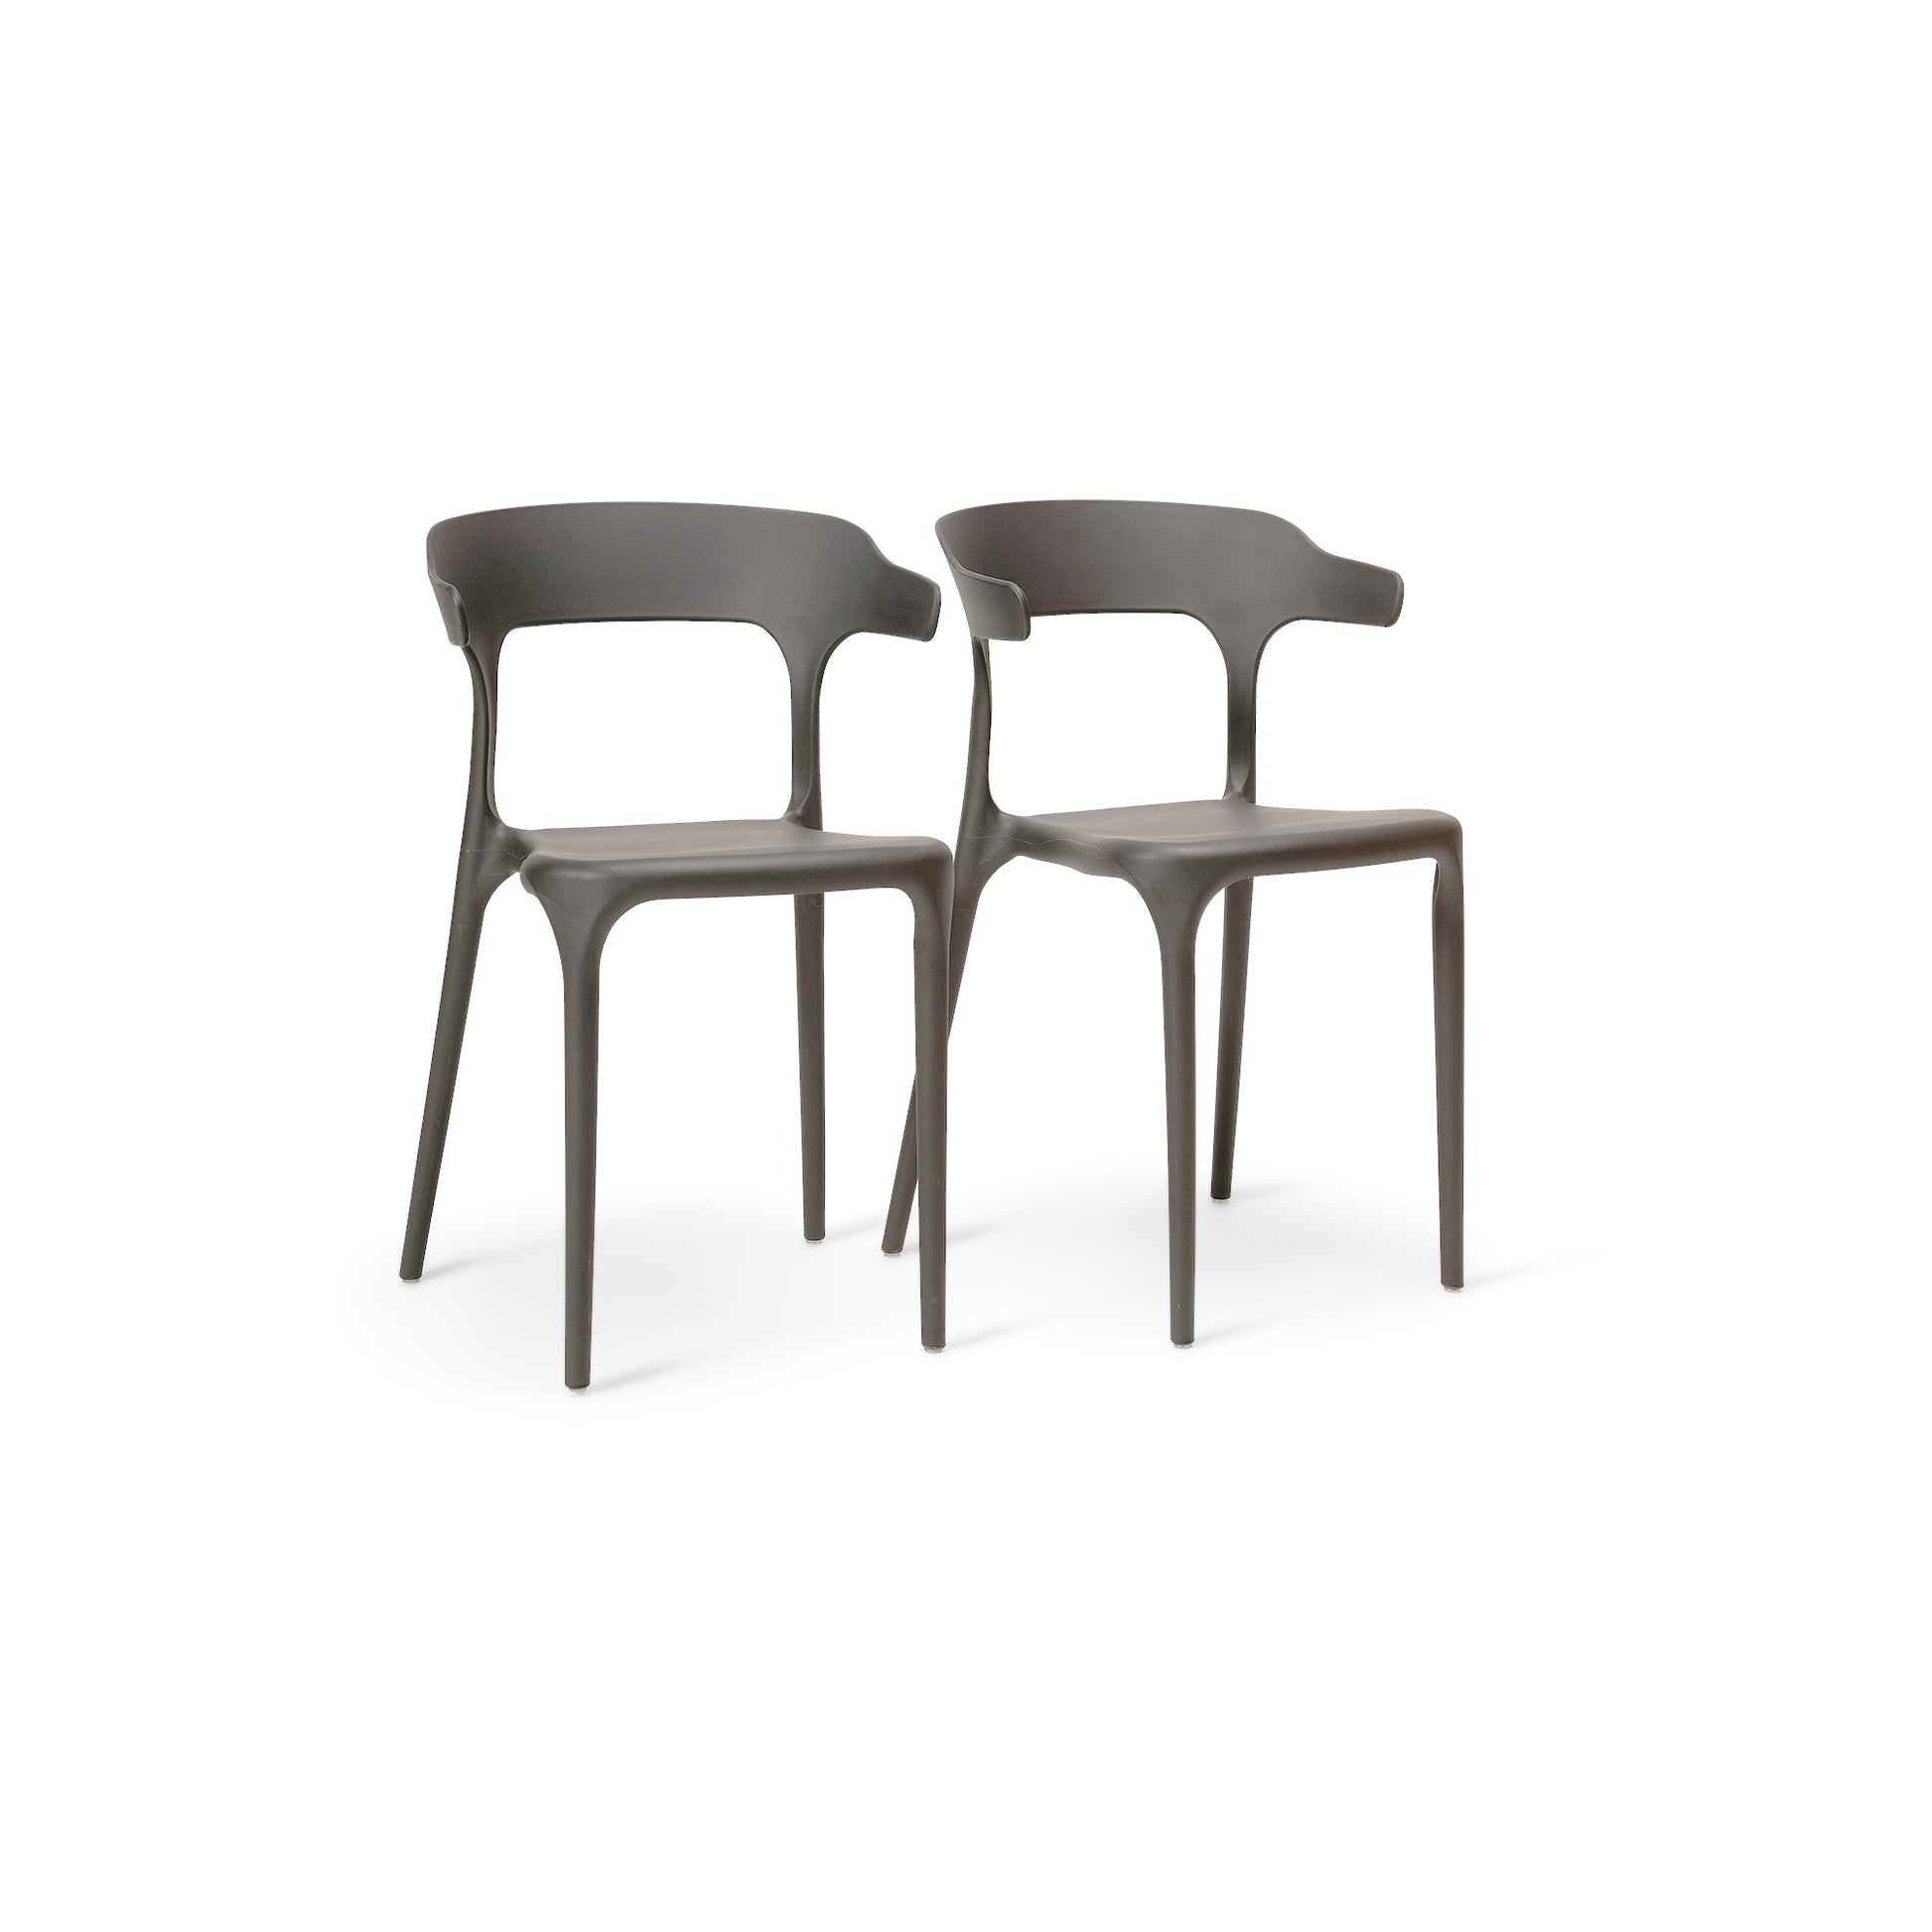 Finn dining chairs - set of 4 - grey - Laura James